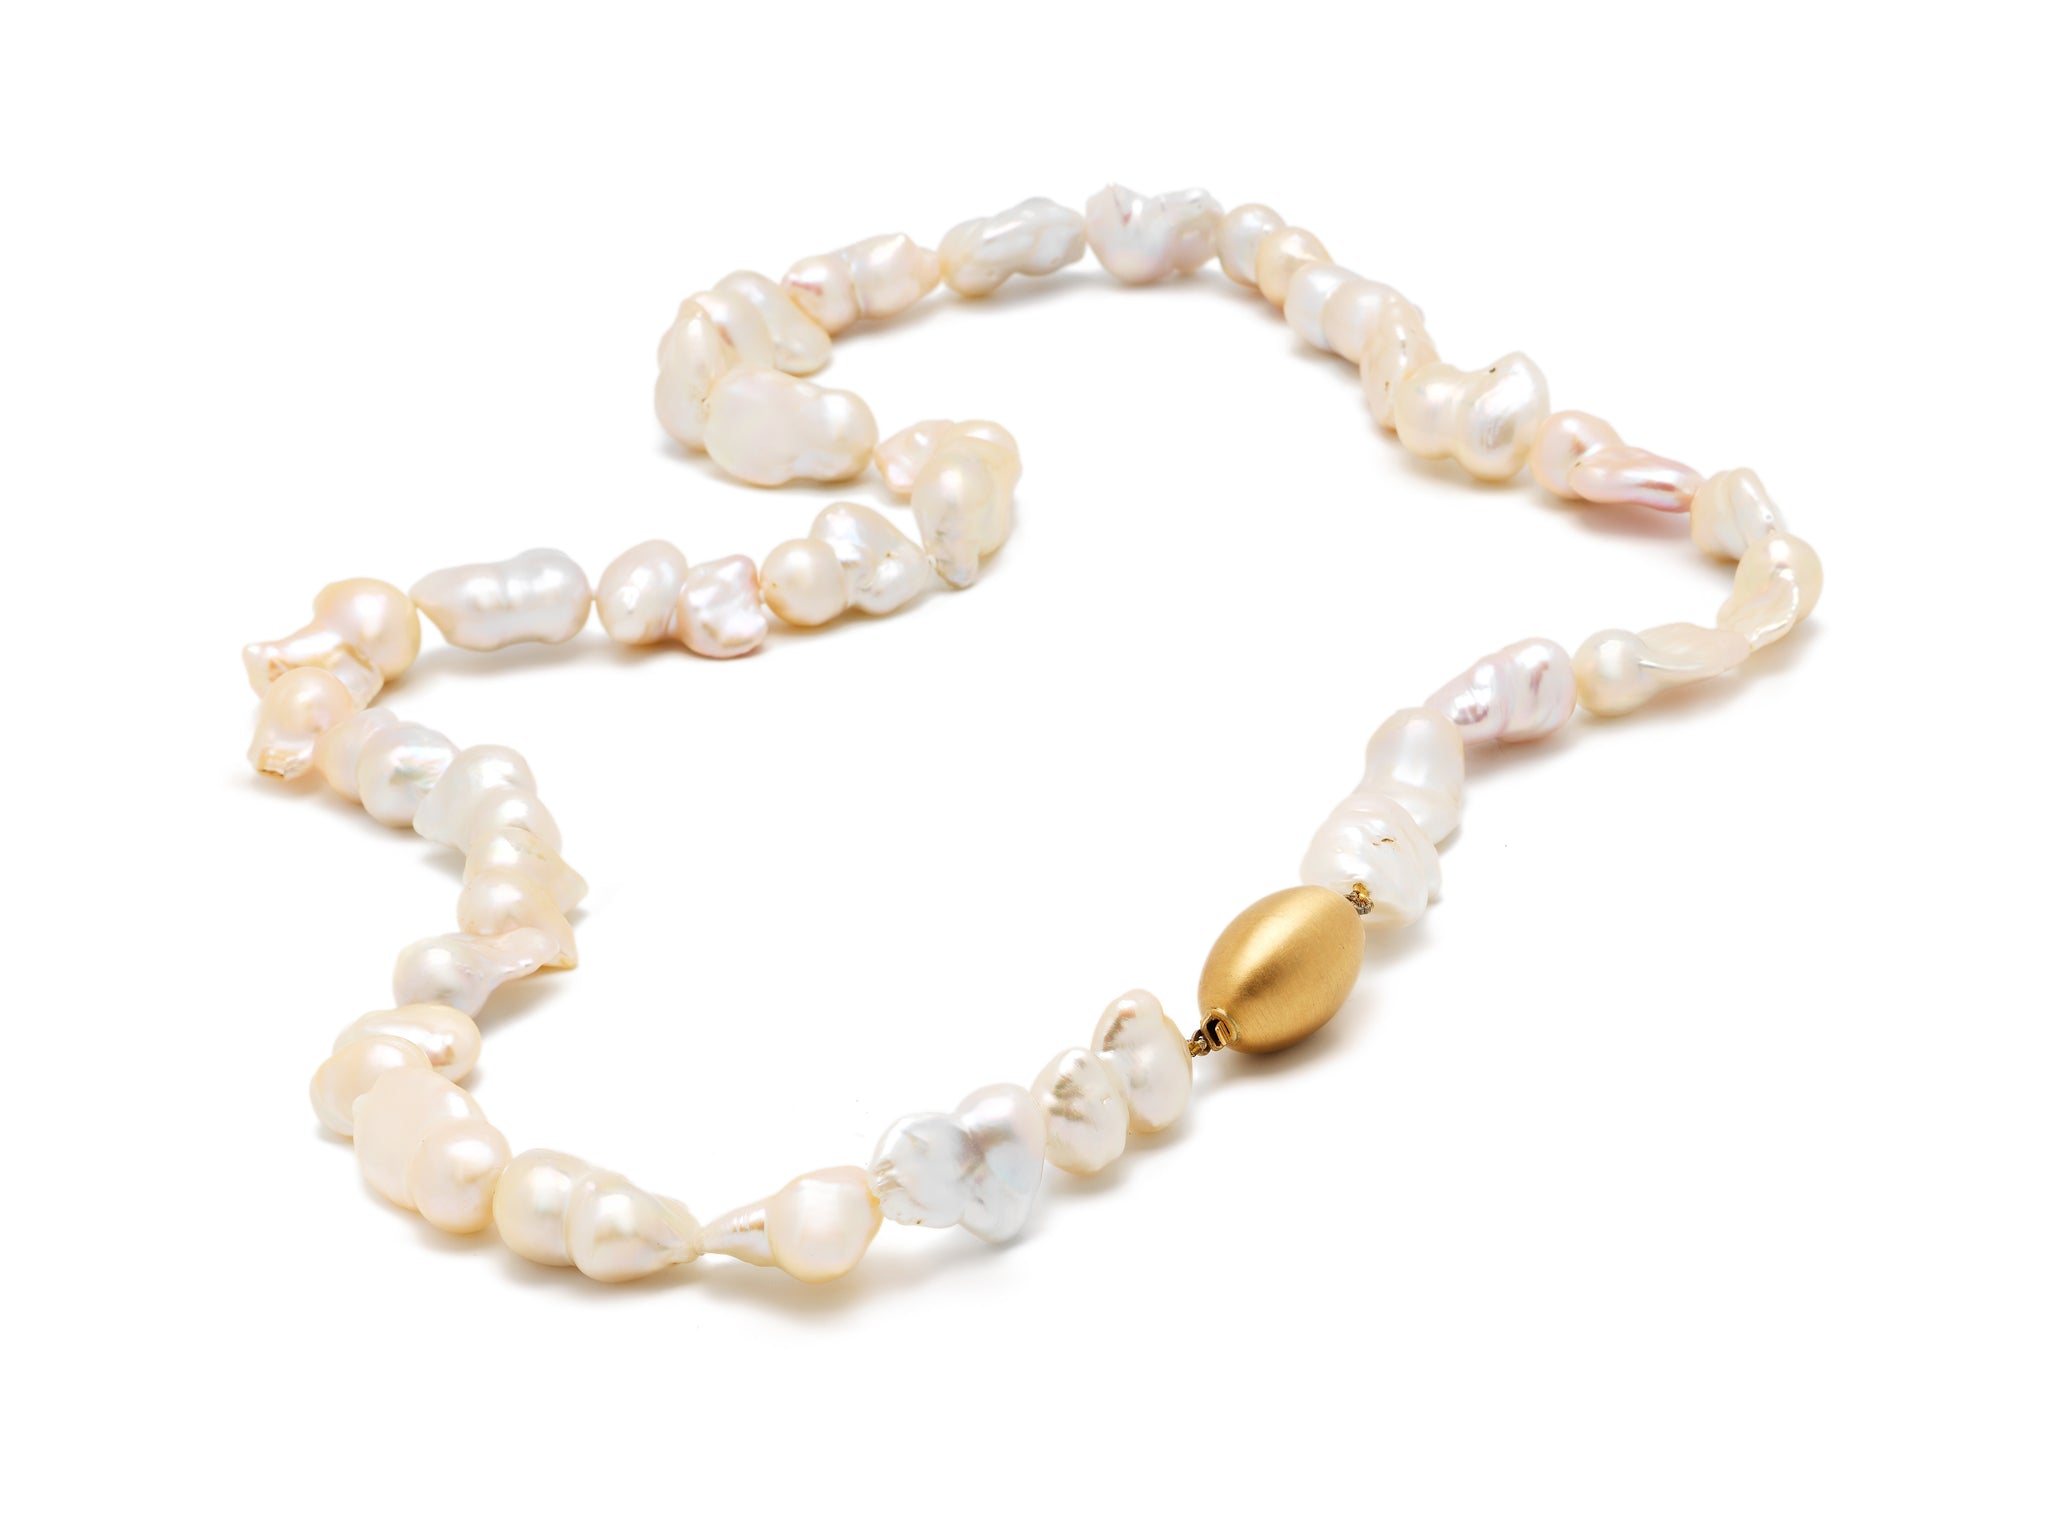 34 pink baroque pearls necklace set with an 18 krt yellow gold lock